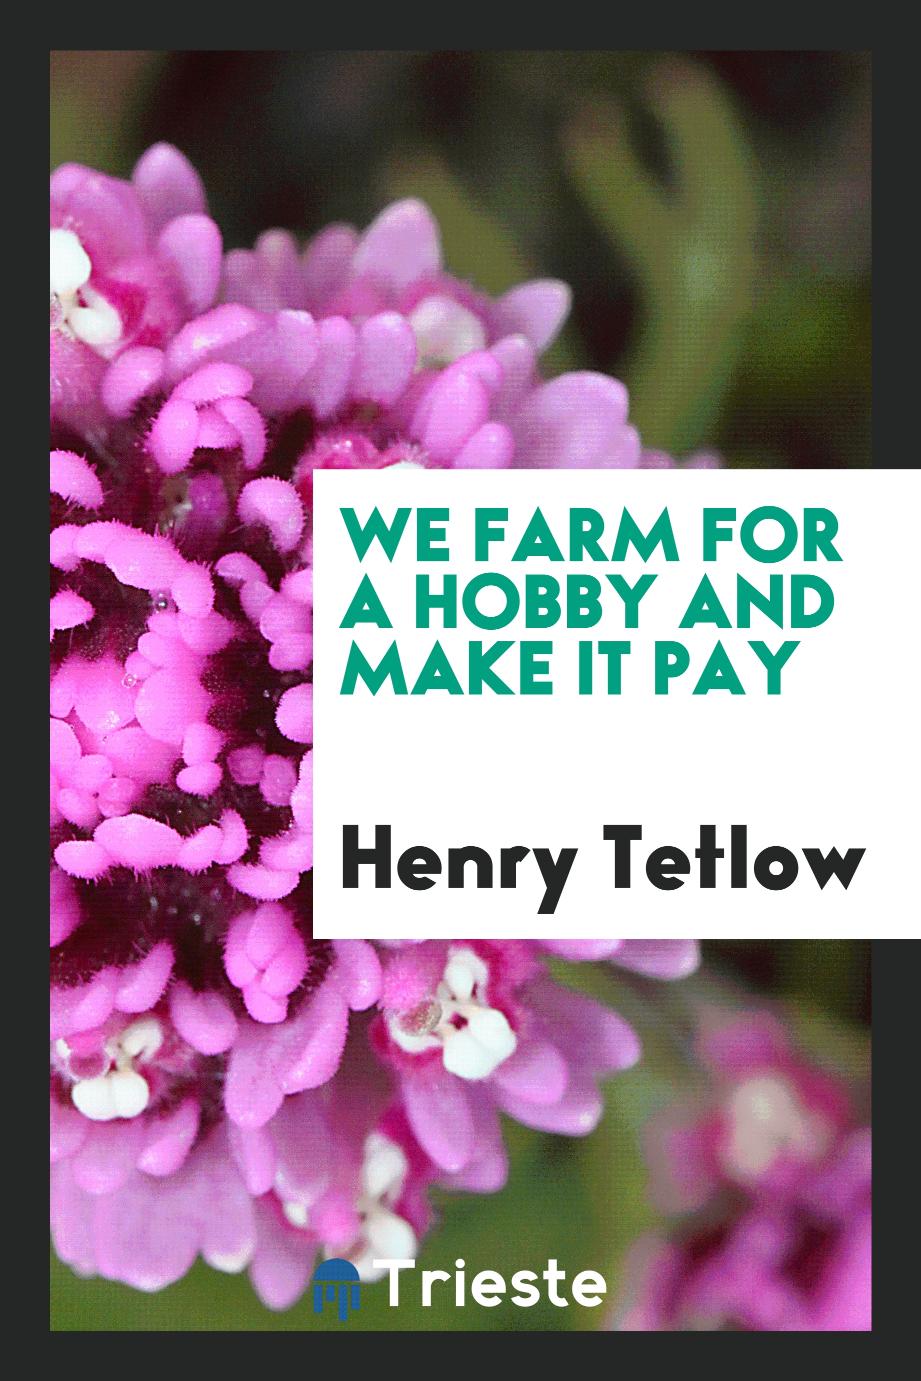 We farm for a hobby and make it pay